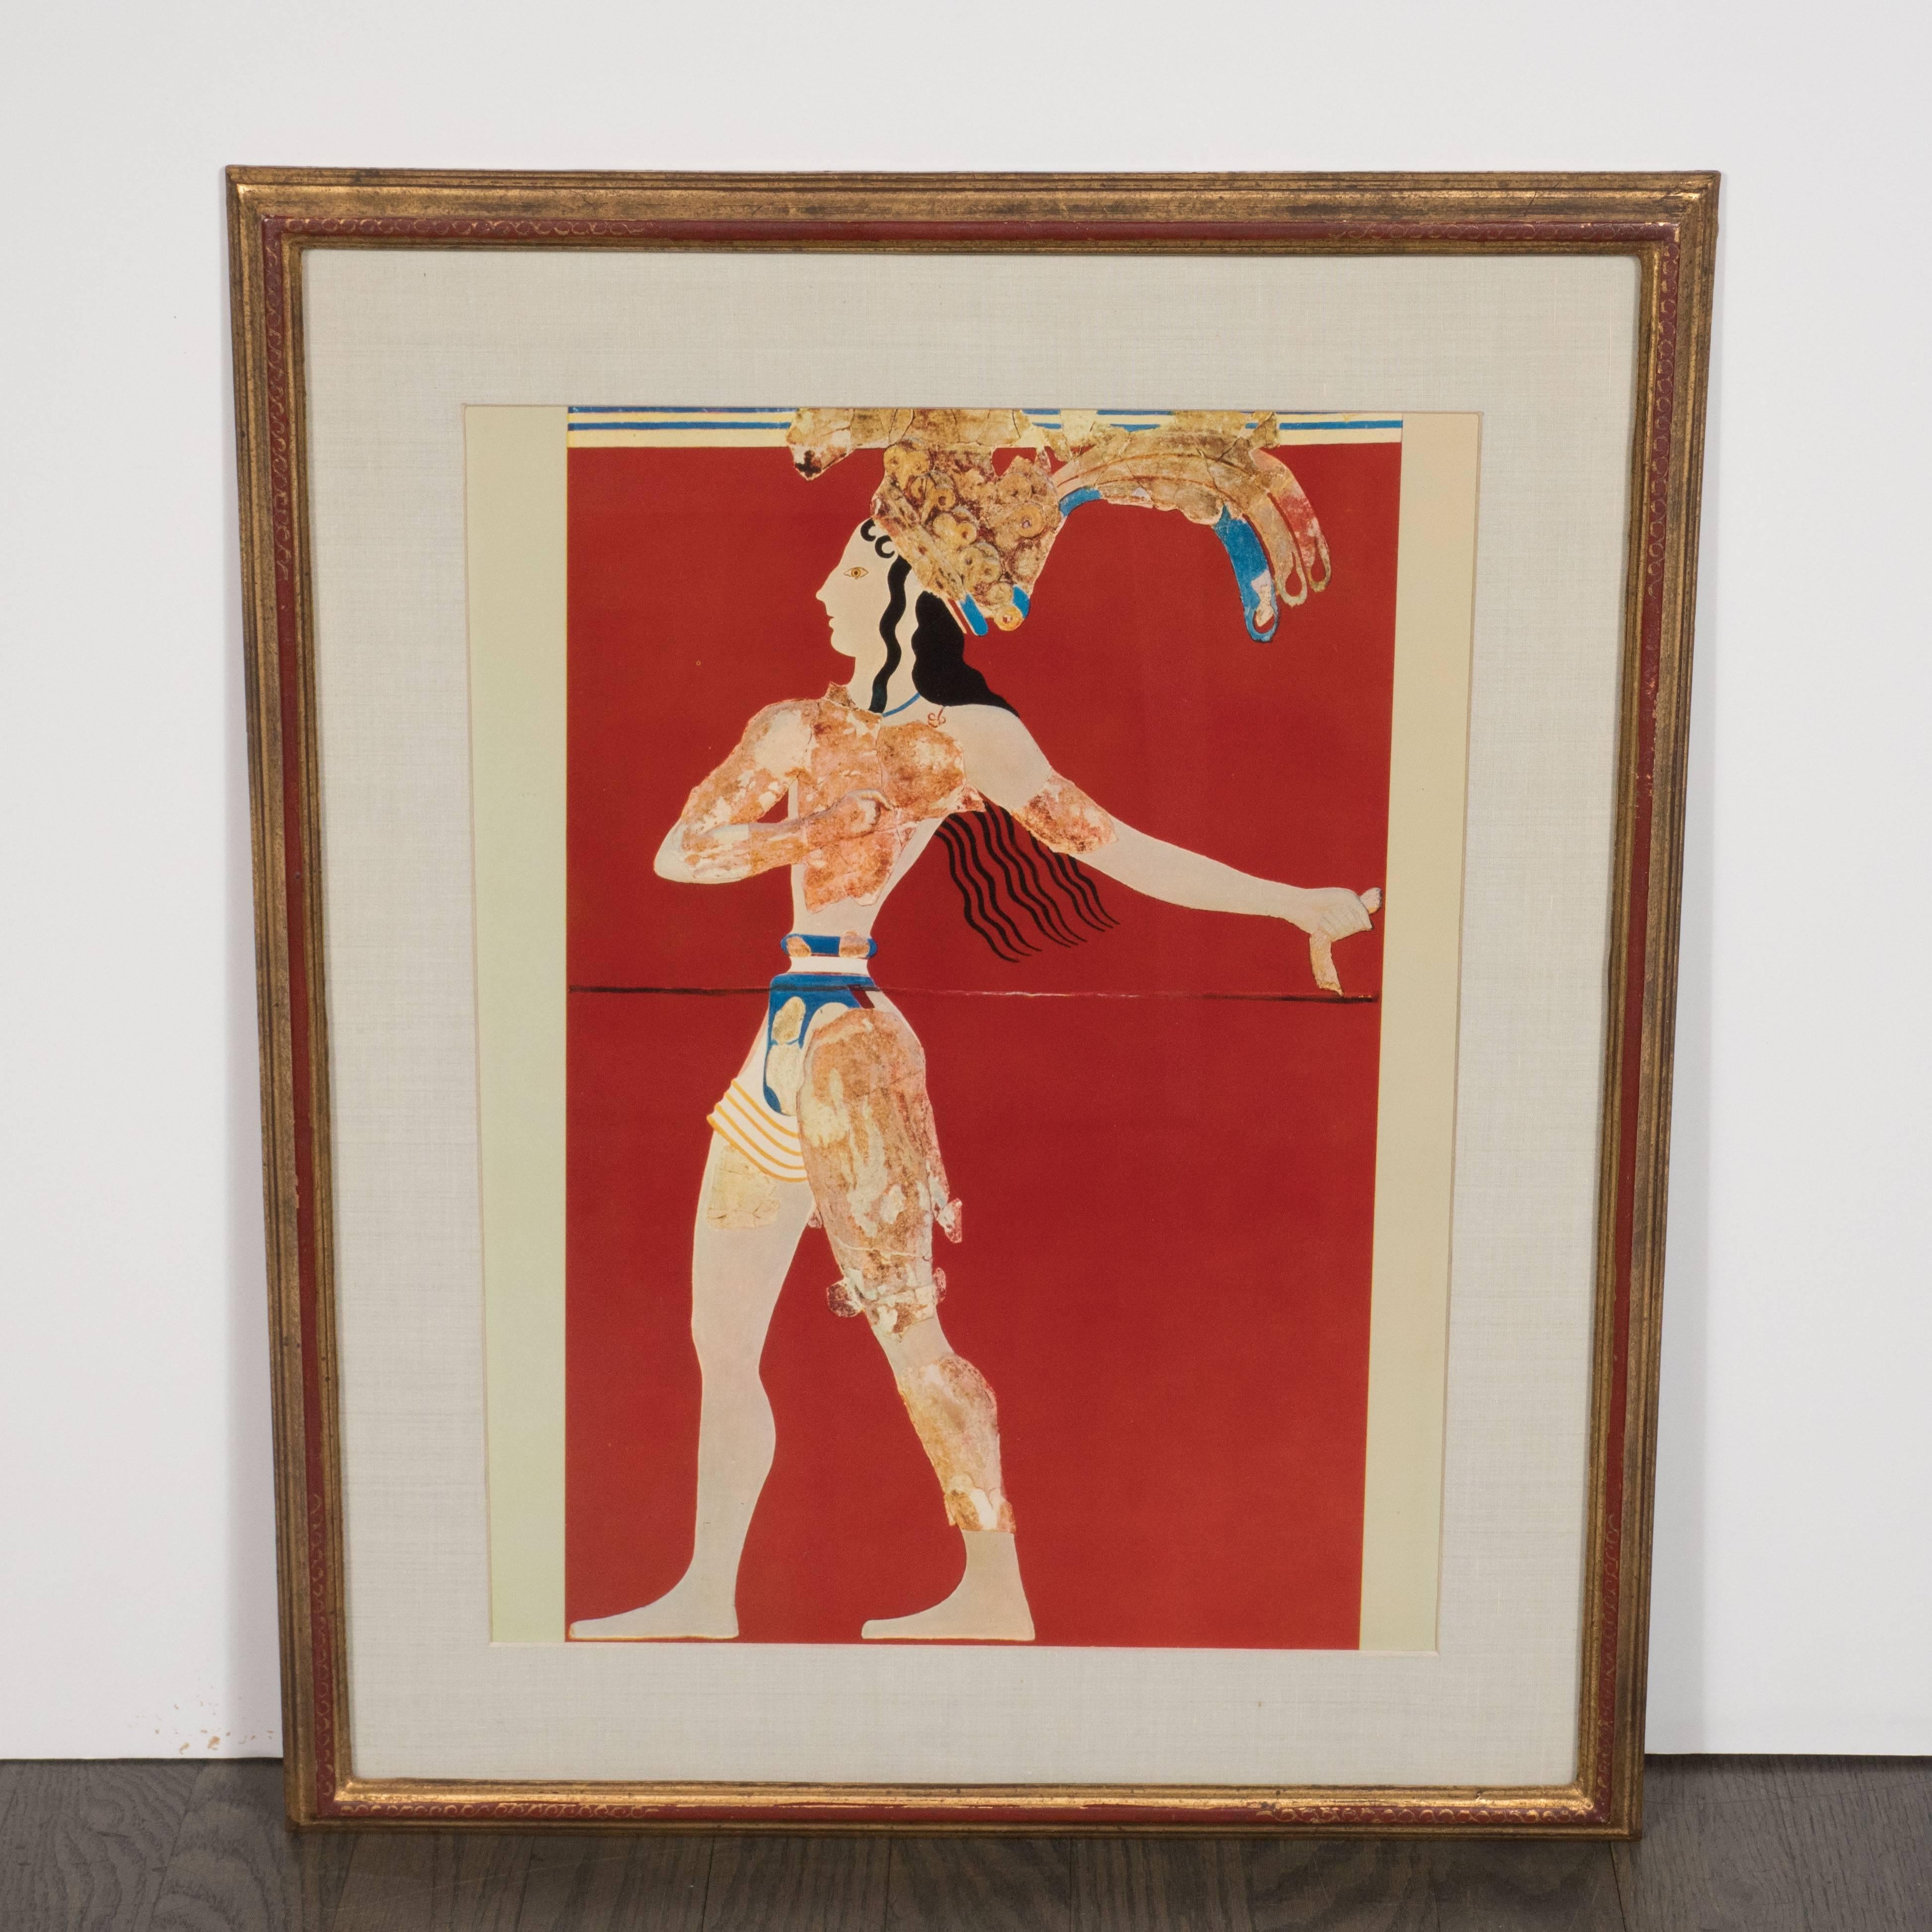 This sophisticated modernist print depicts a pottery fragment culled from Ancient Greek ruins featuring a male figure donning a loin cloth and elaborate headdress. Rendered in tones of marigold and turquoise against a vibrant red coral colored